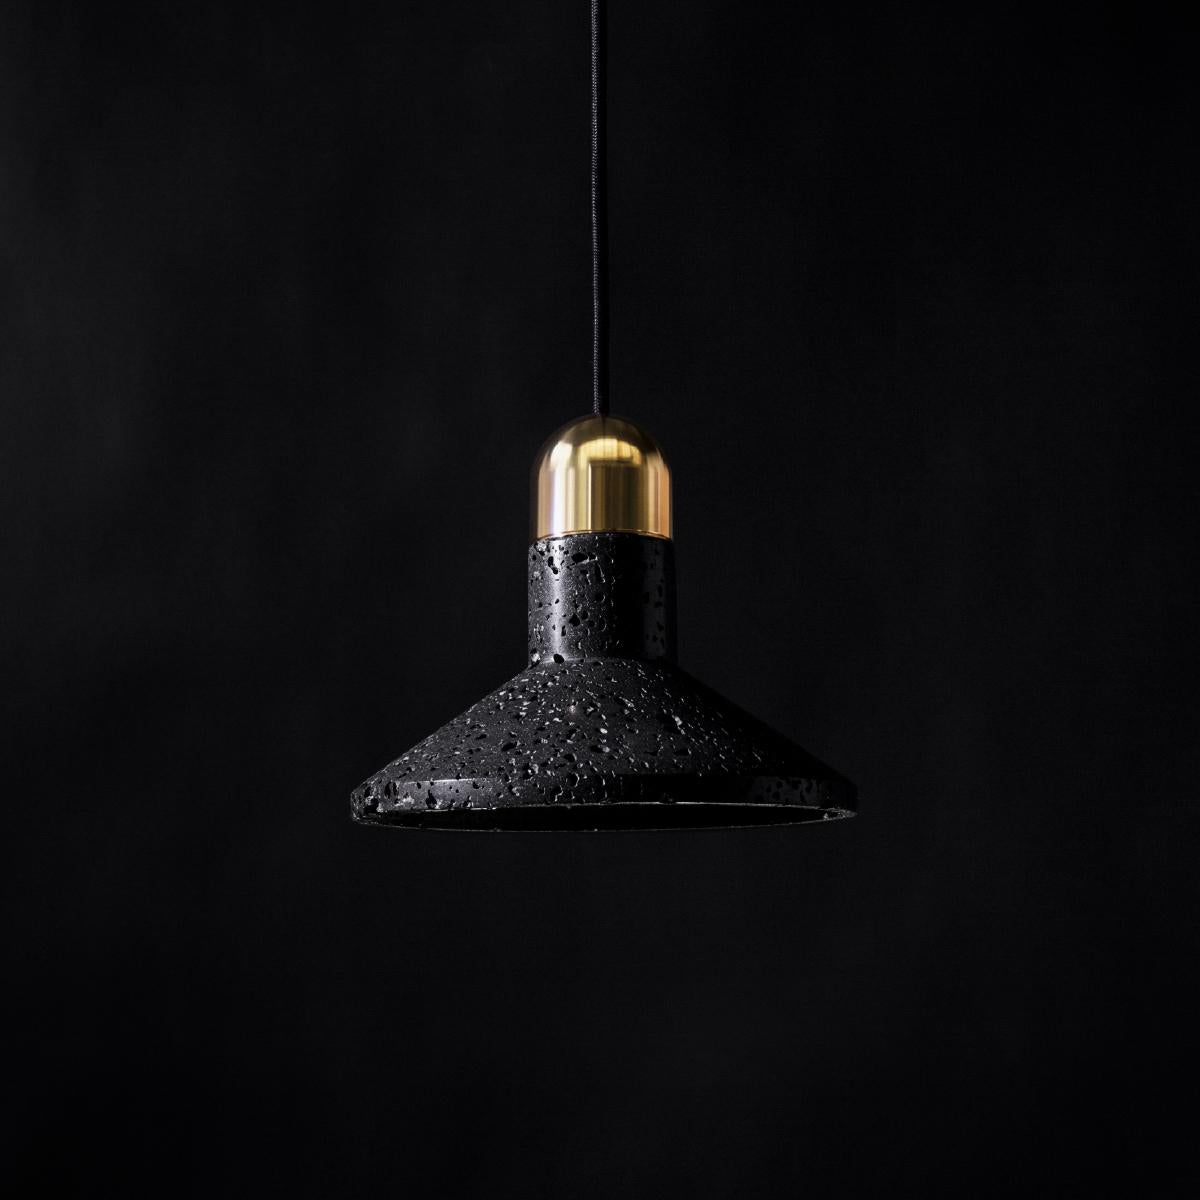 Pendant lamp 'Shang' by Buzao x Bentu Design. 
After concrete version, let's meet the black lava stone version!

(Sold individually)

16 cm High; 20 cm Length
Wire: 2Meters Black (adjustable)

Brass (gold) or aluminum (black) finish.

Lamp Type: E27